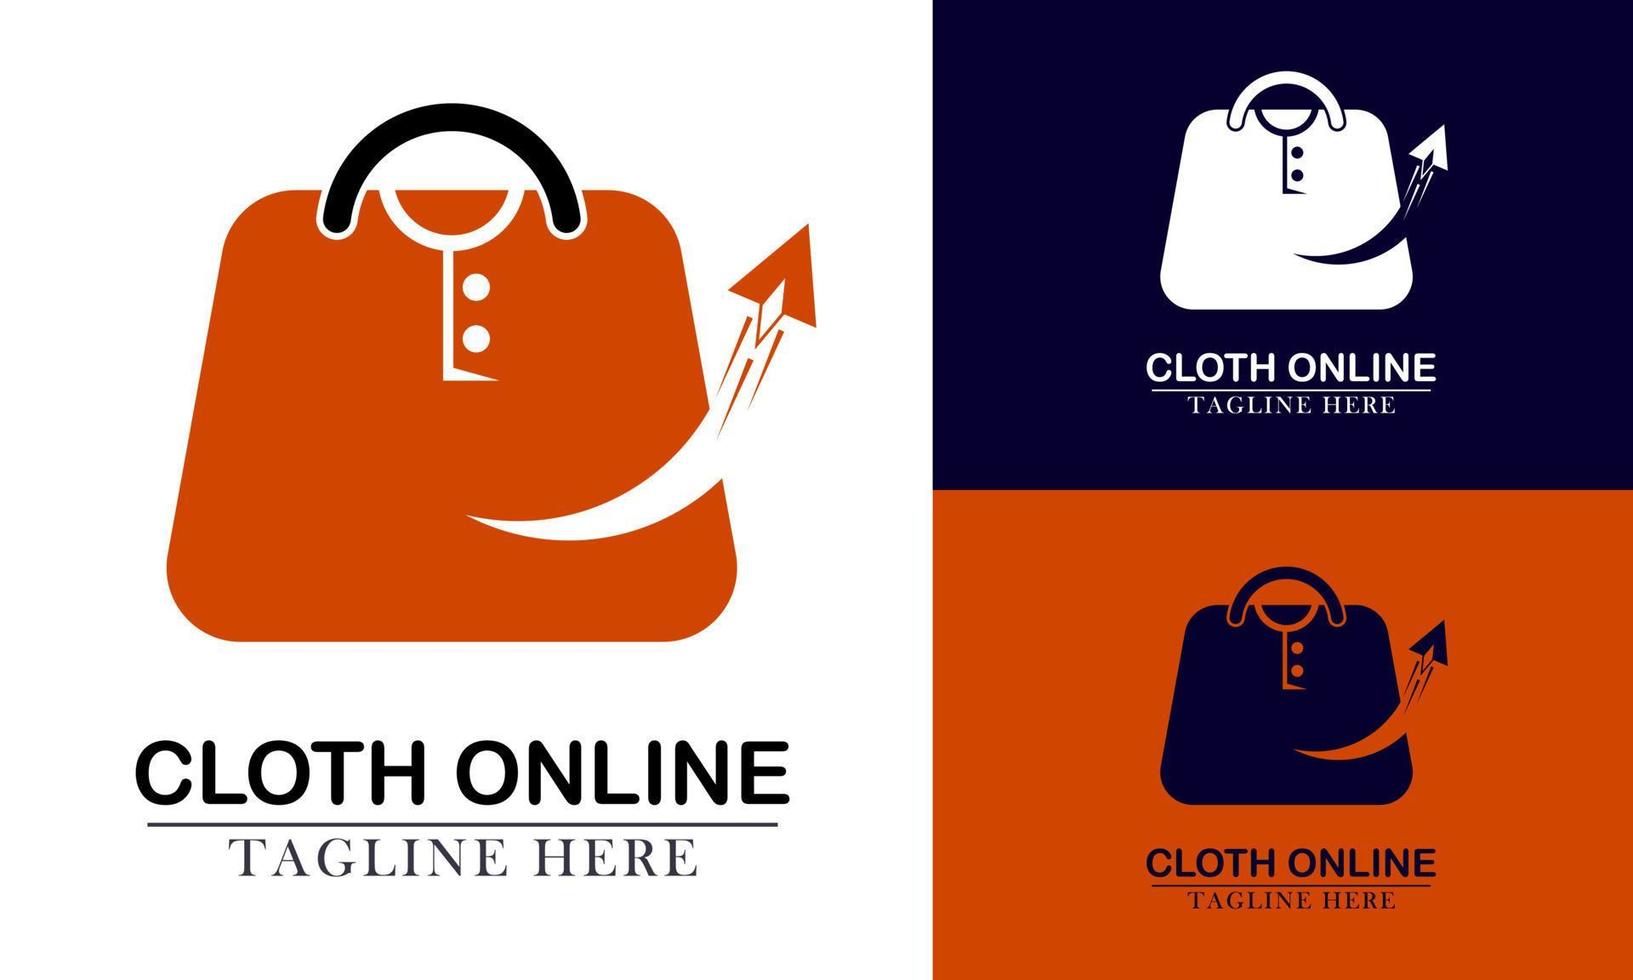 bag clothes and airplane elements logo icon vector